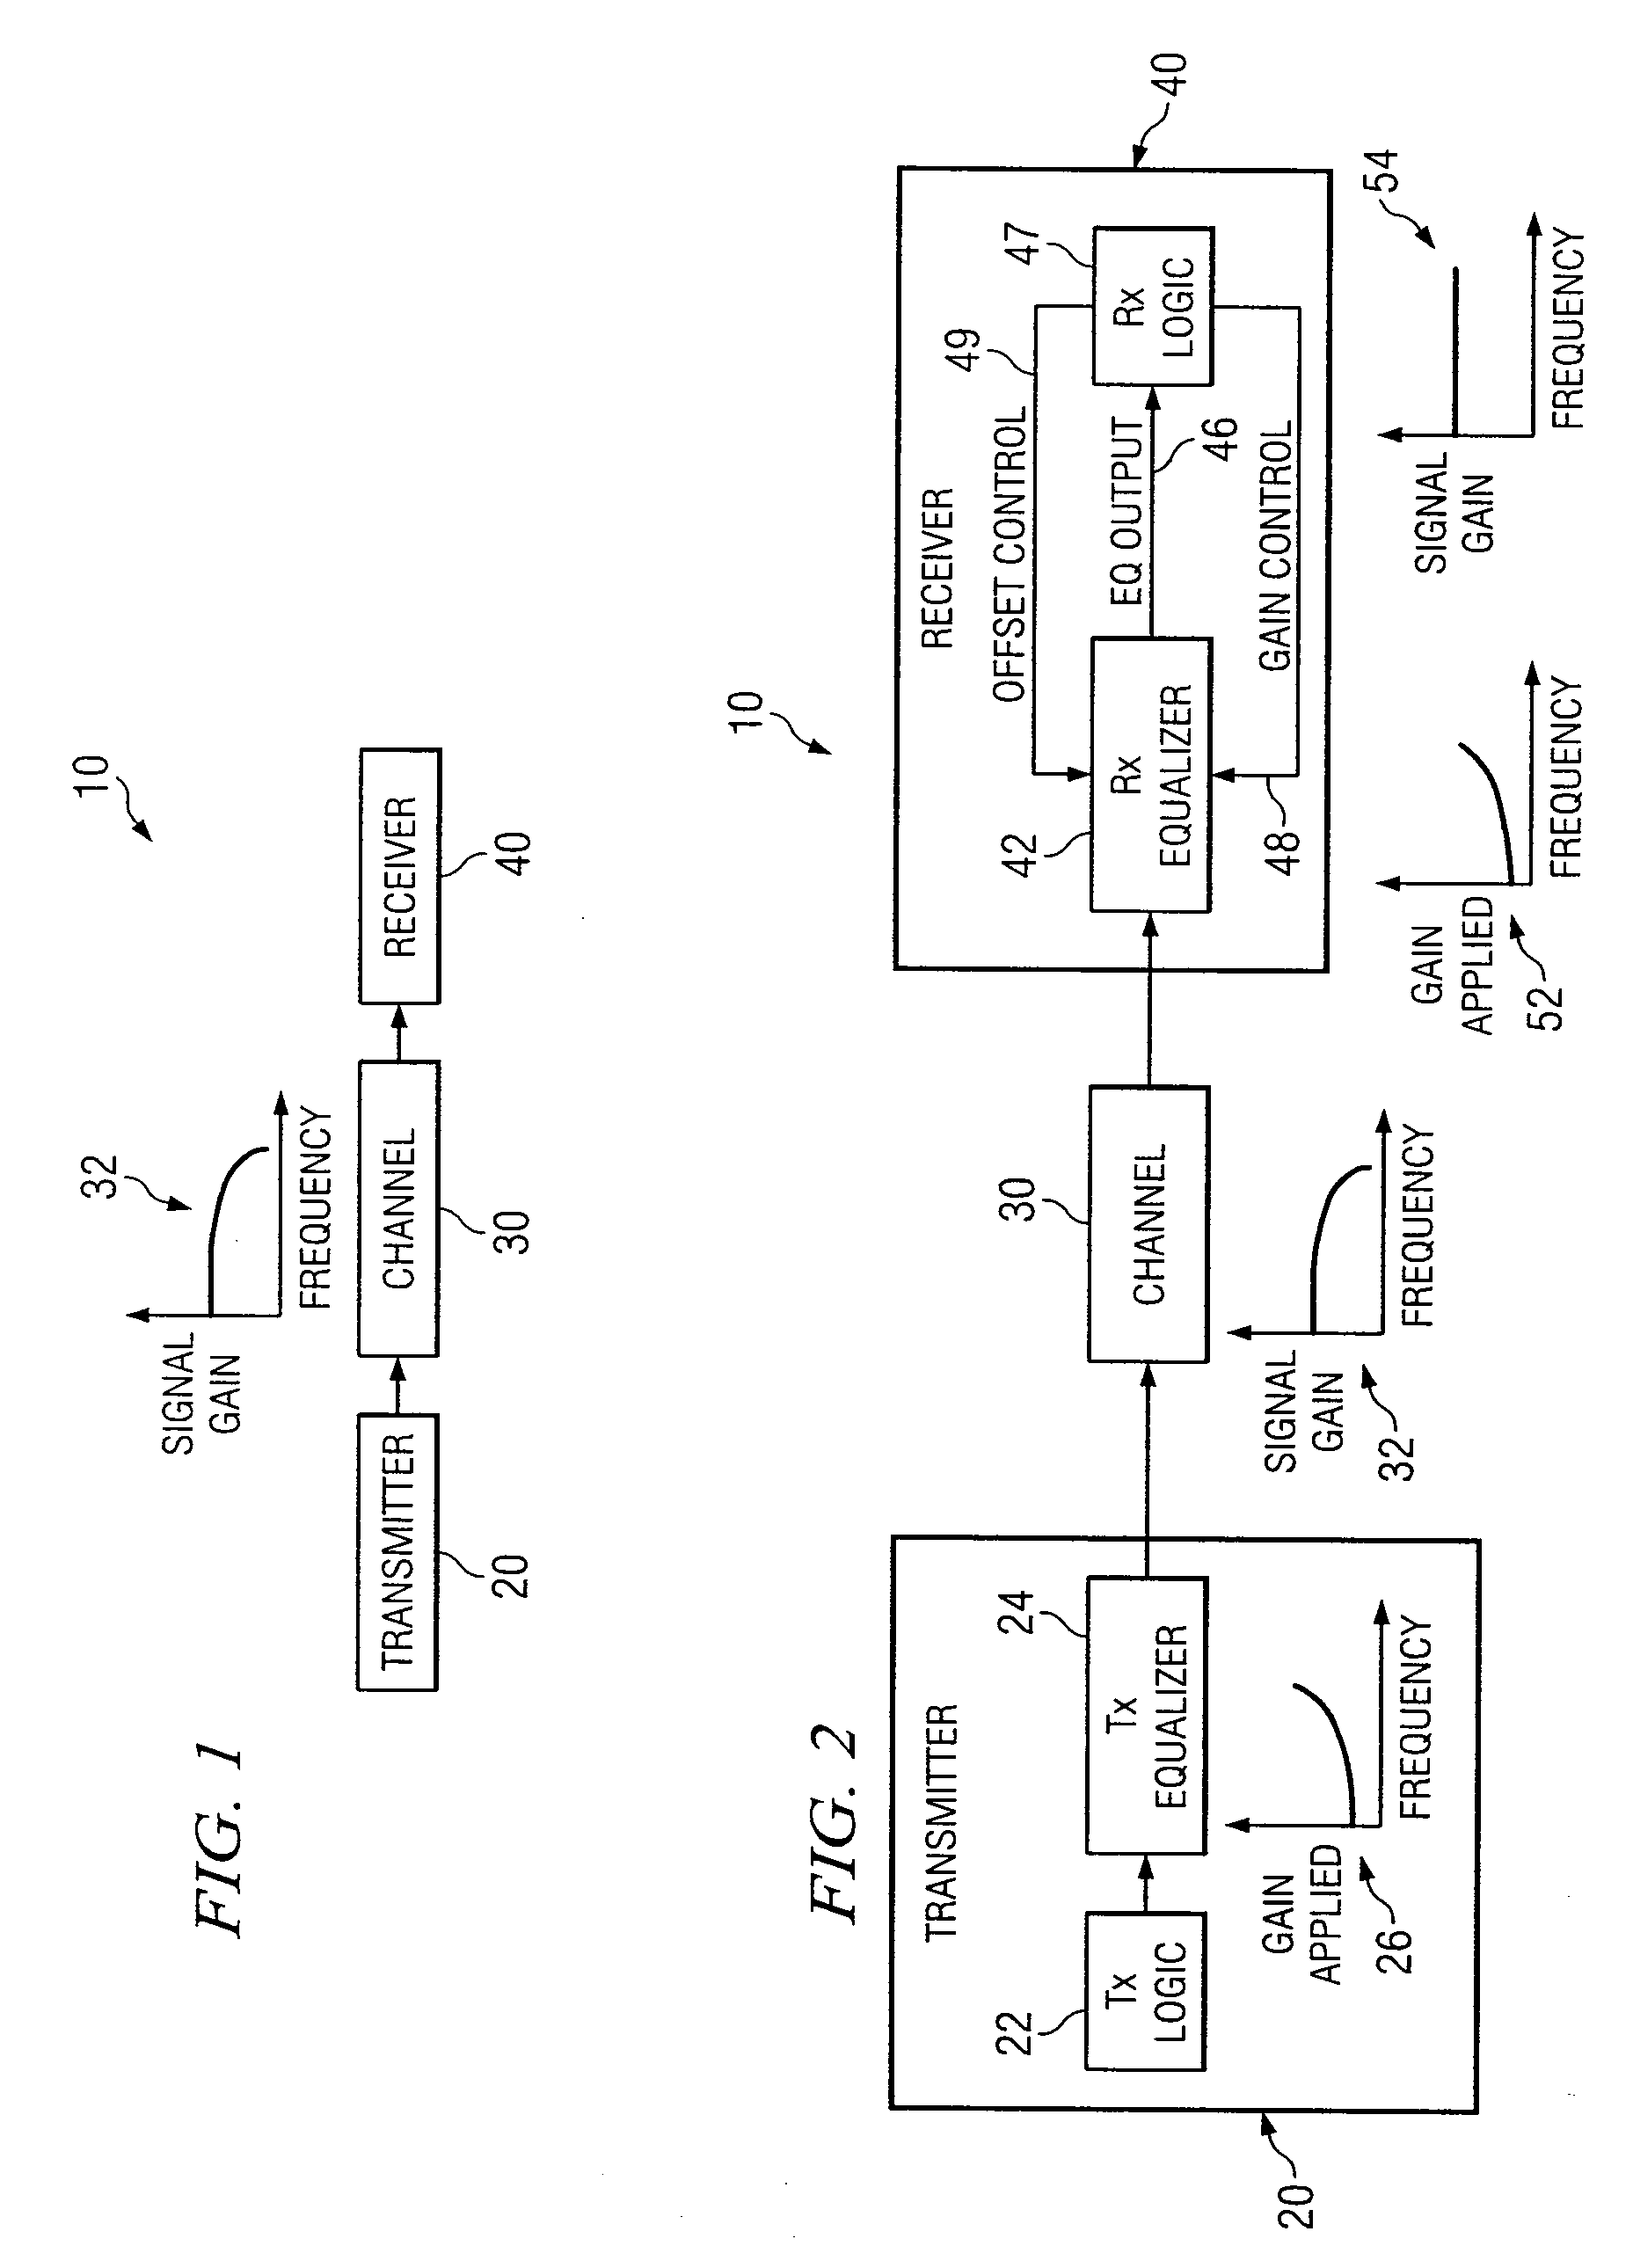 System and Method for the Adjustment of Compensation Applied to a Signal Using Filter Patterns